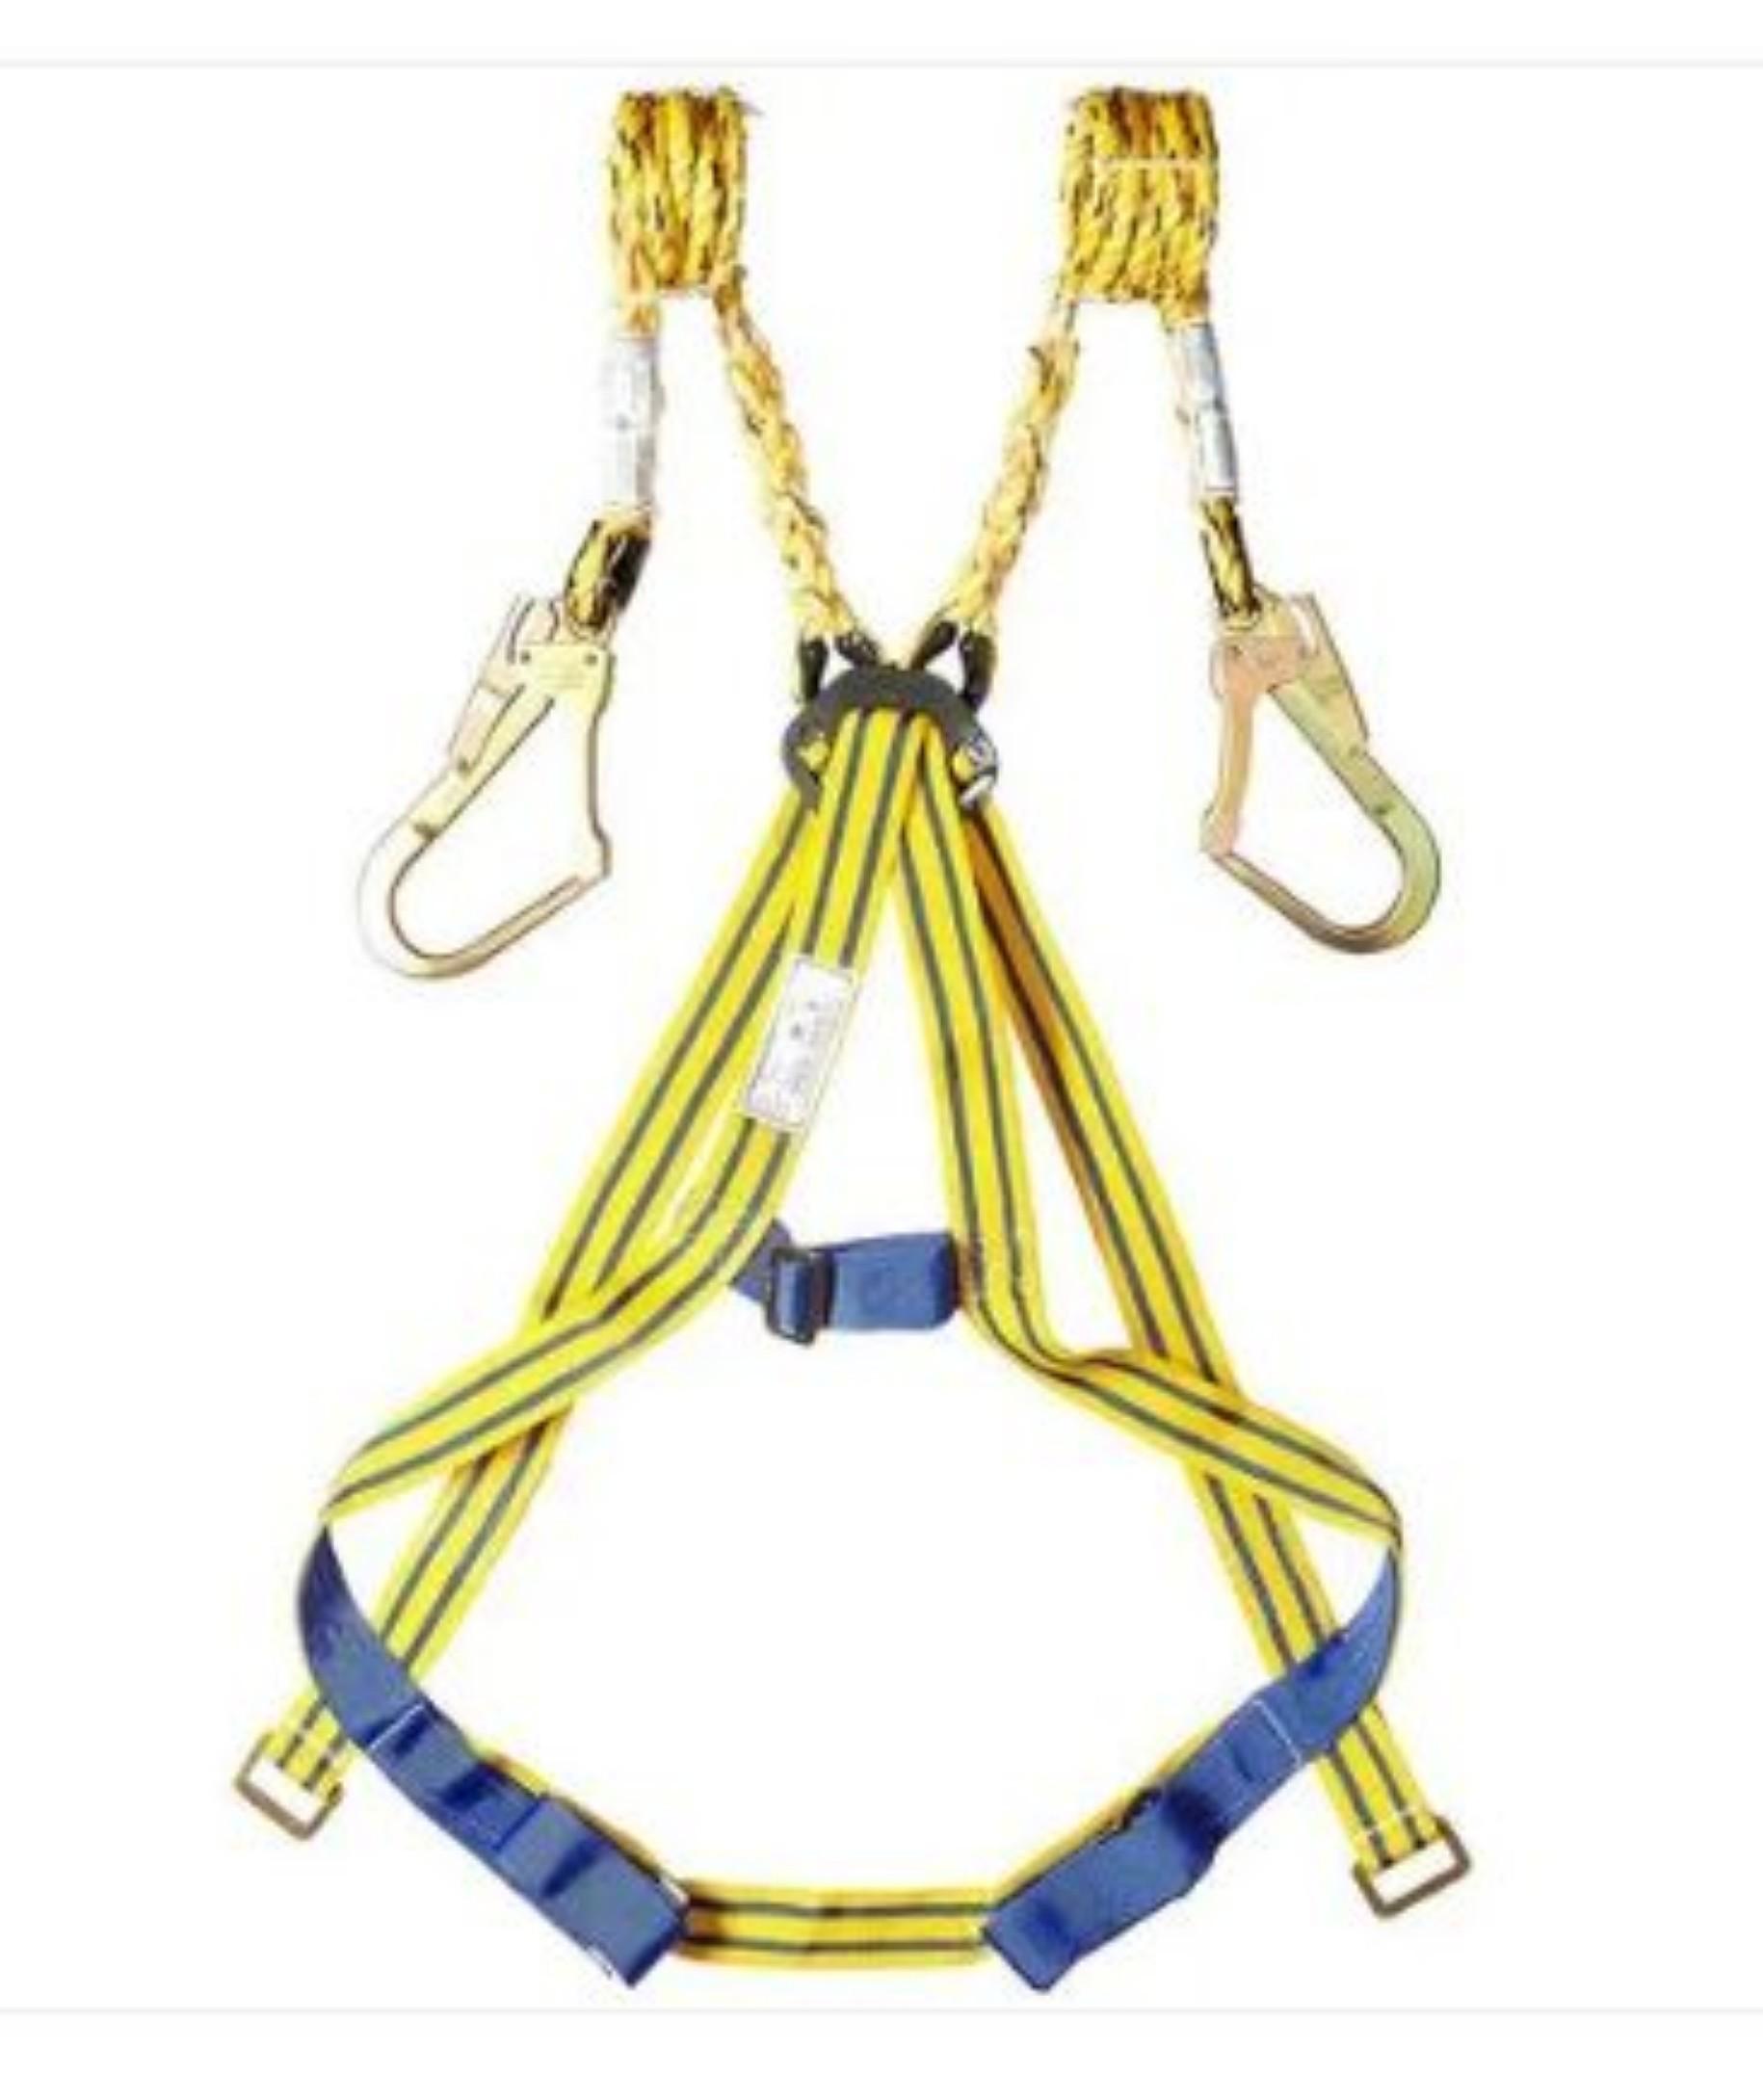 Buy Nylon Full Body Double Rope Scaffold Hook Safety Harness Free